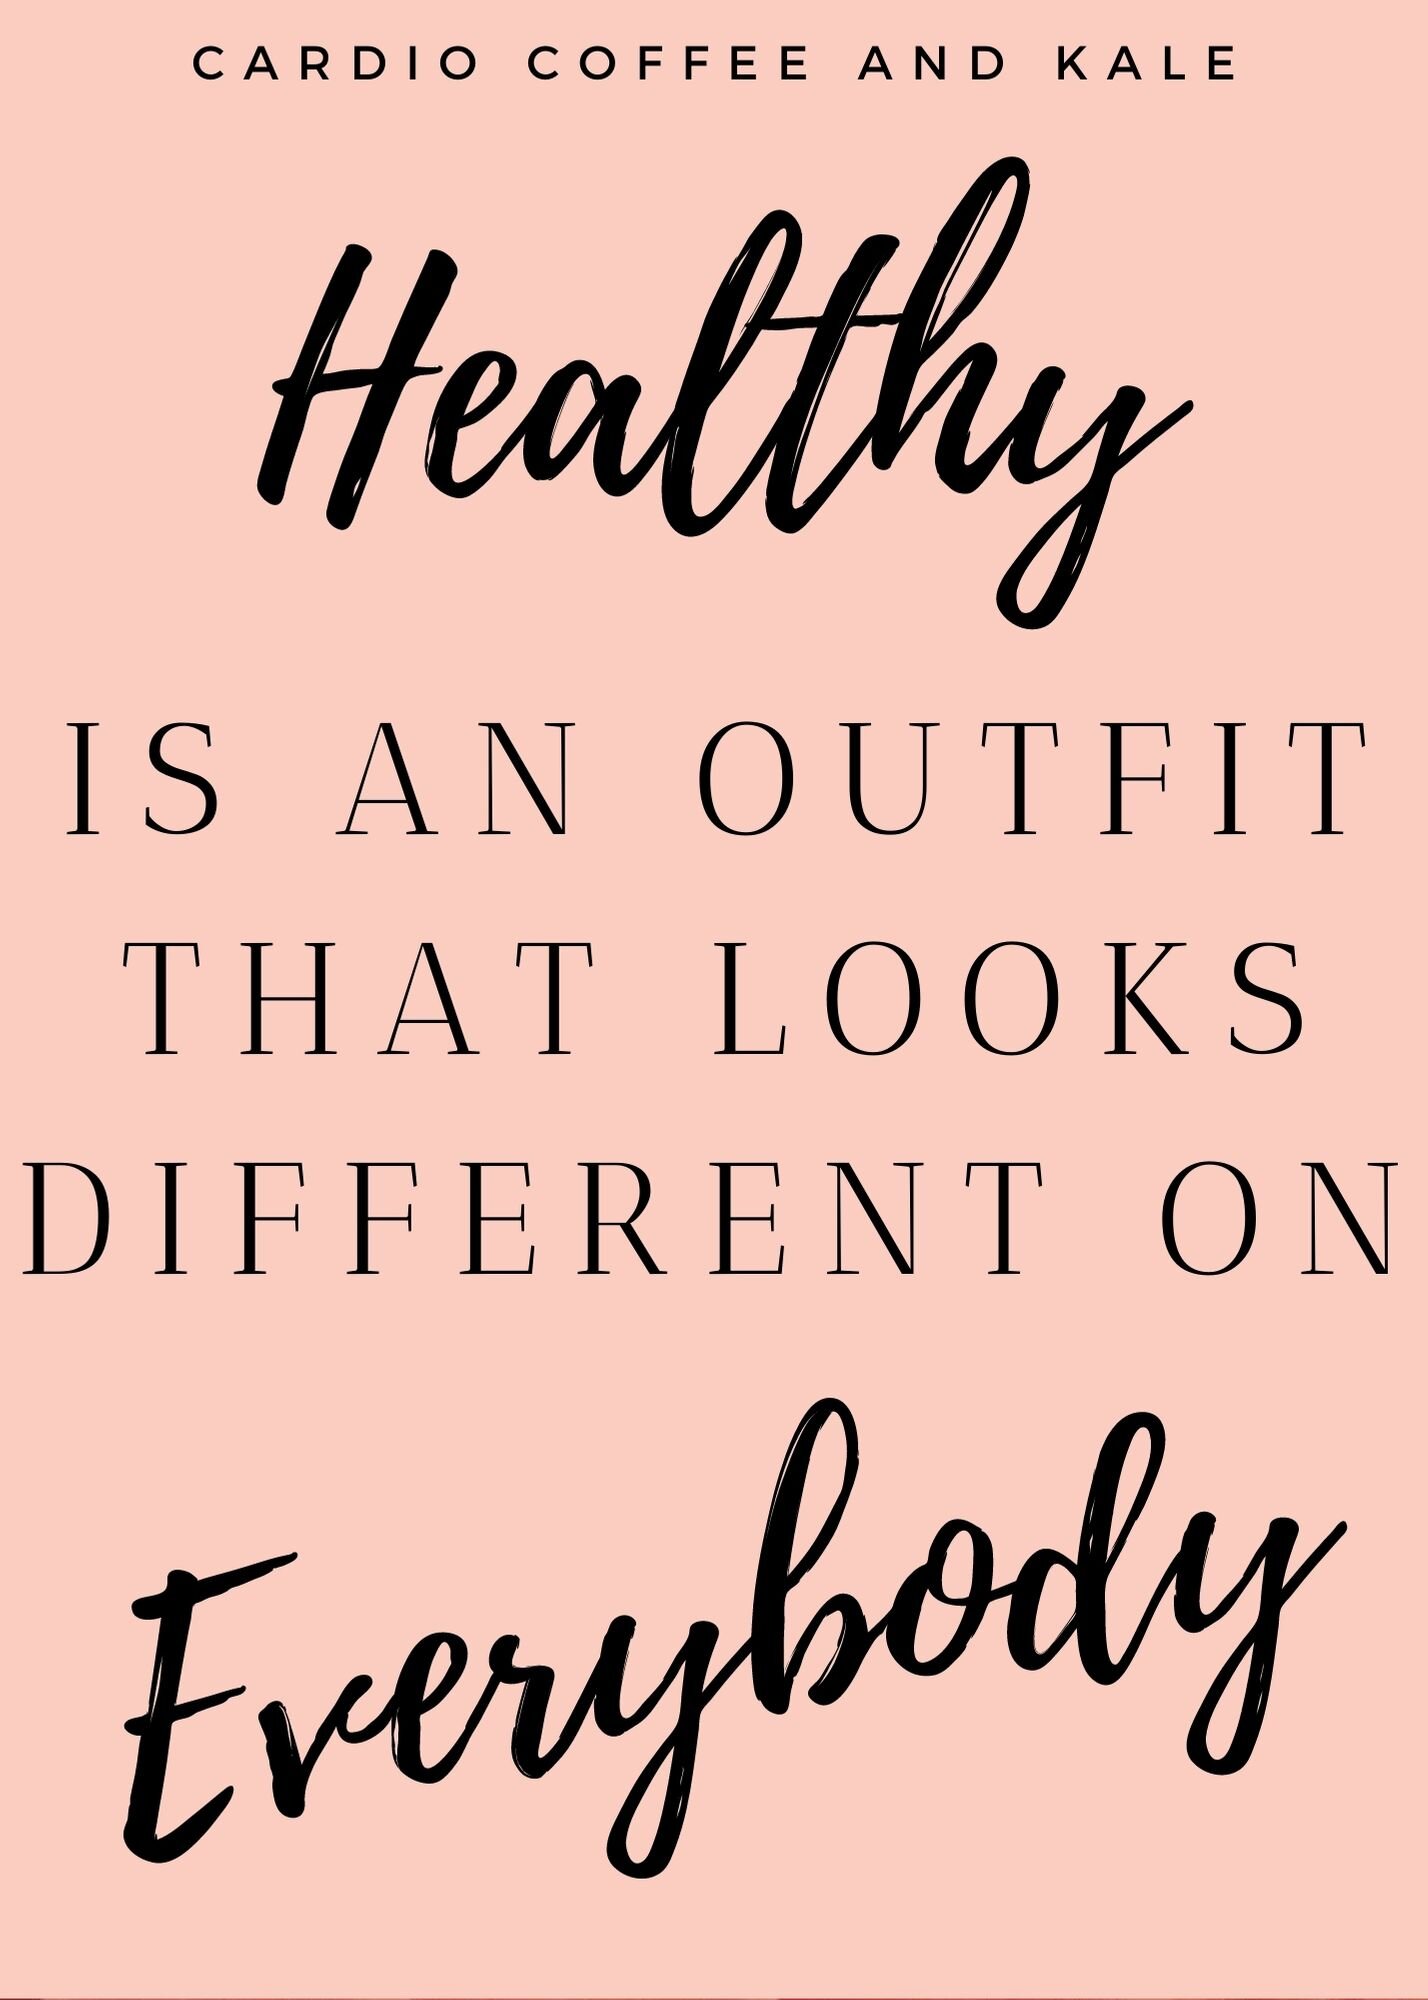 35 Inspirational Health and Fitness Quotes to Print or Pin — cardio coffee  and kale